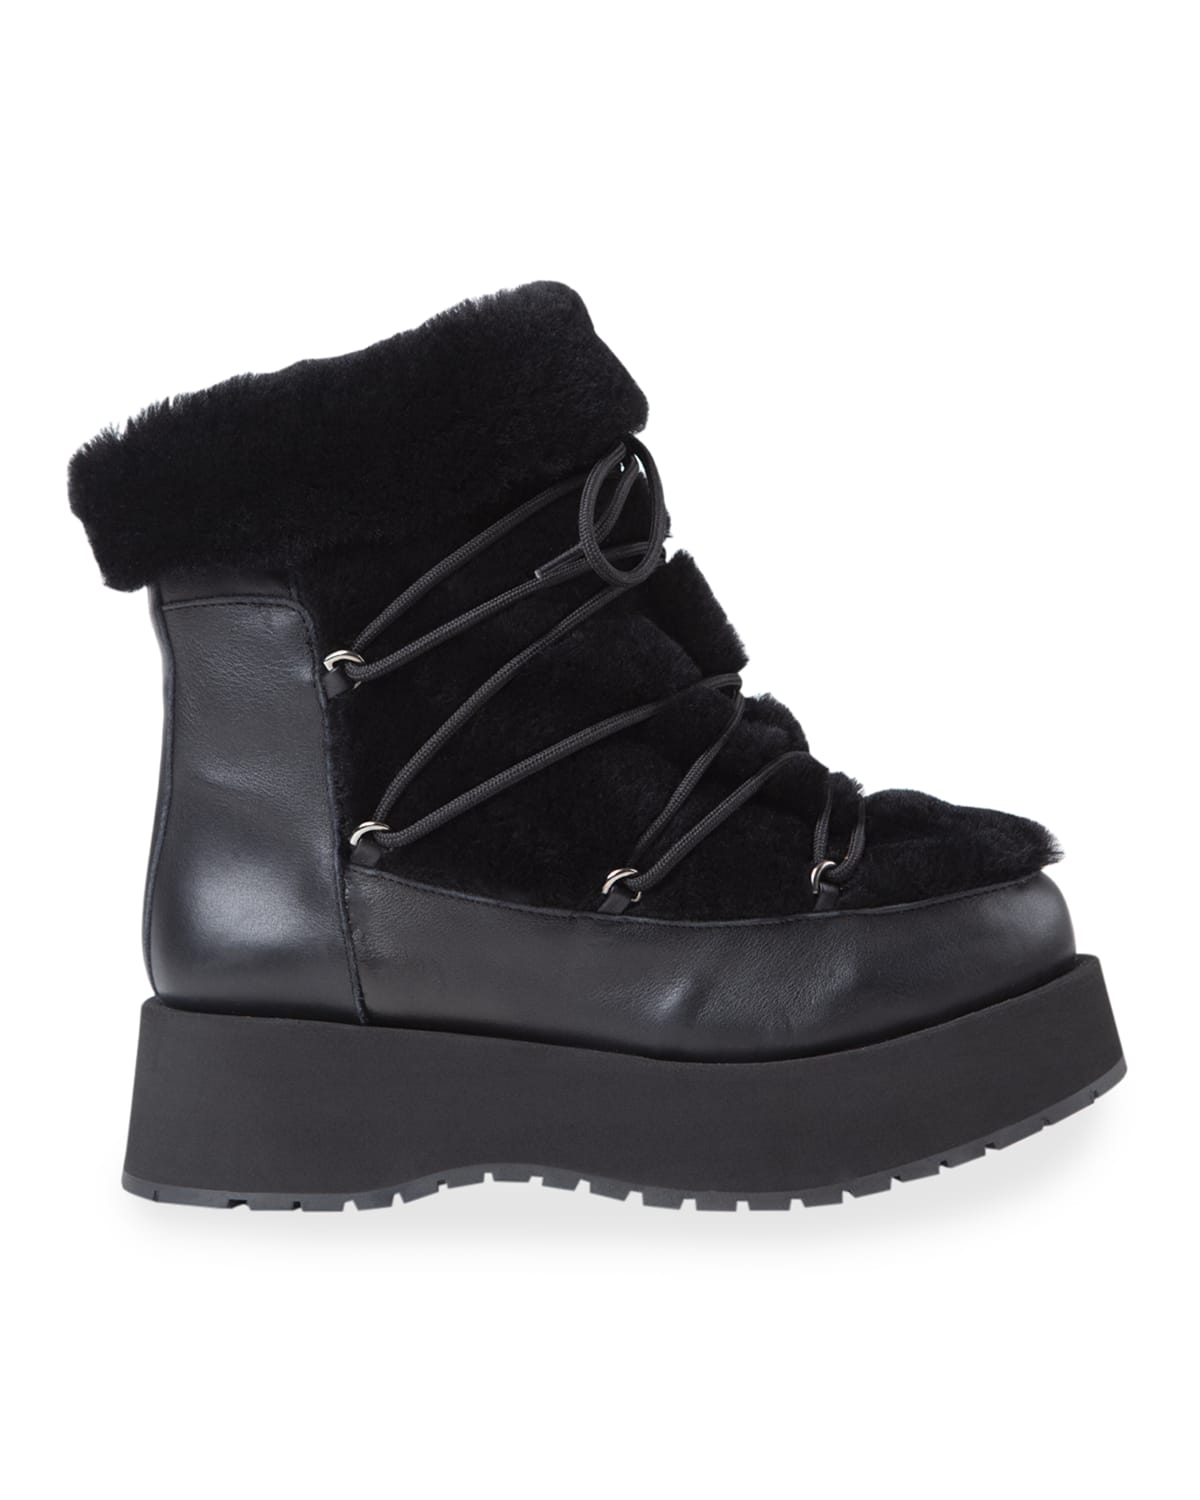 Paloma Barceló Miska Leather Shearling Lace-up Booties In Black | ModeSens